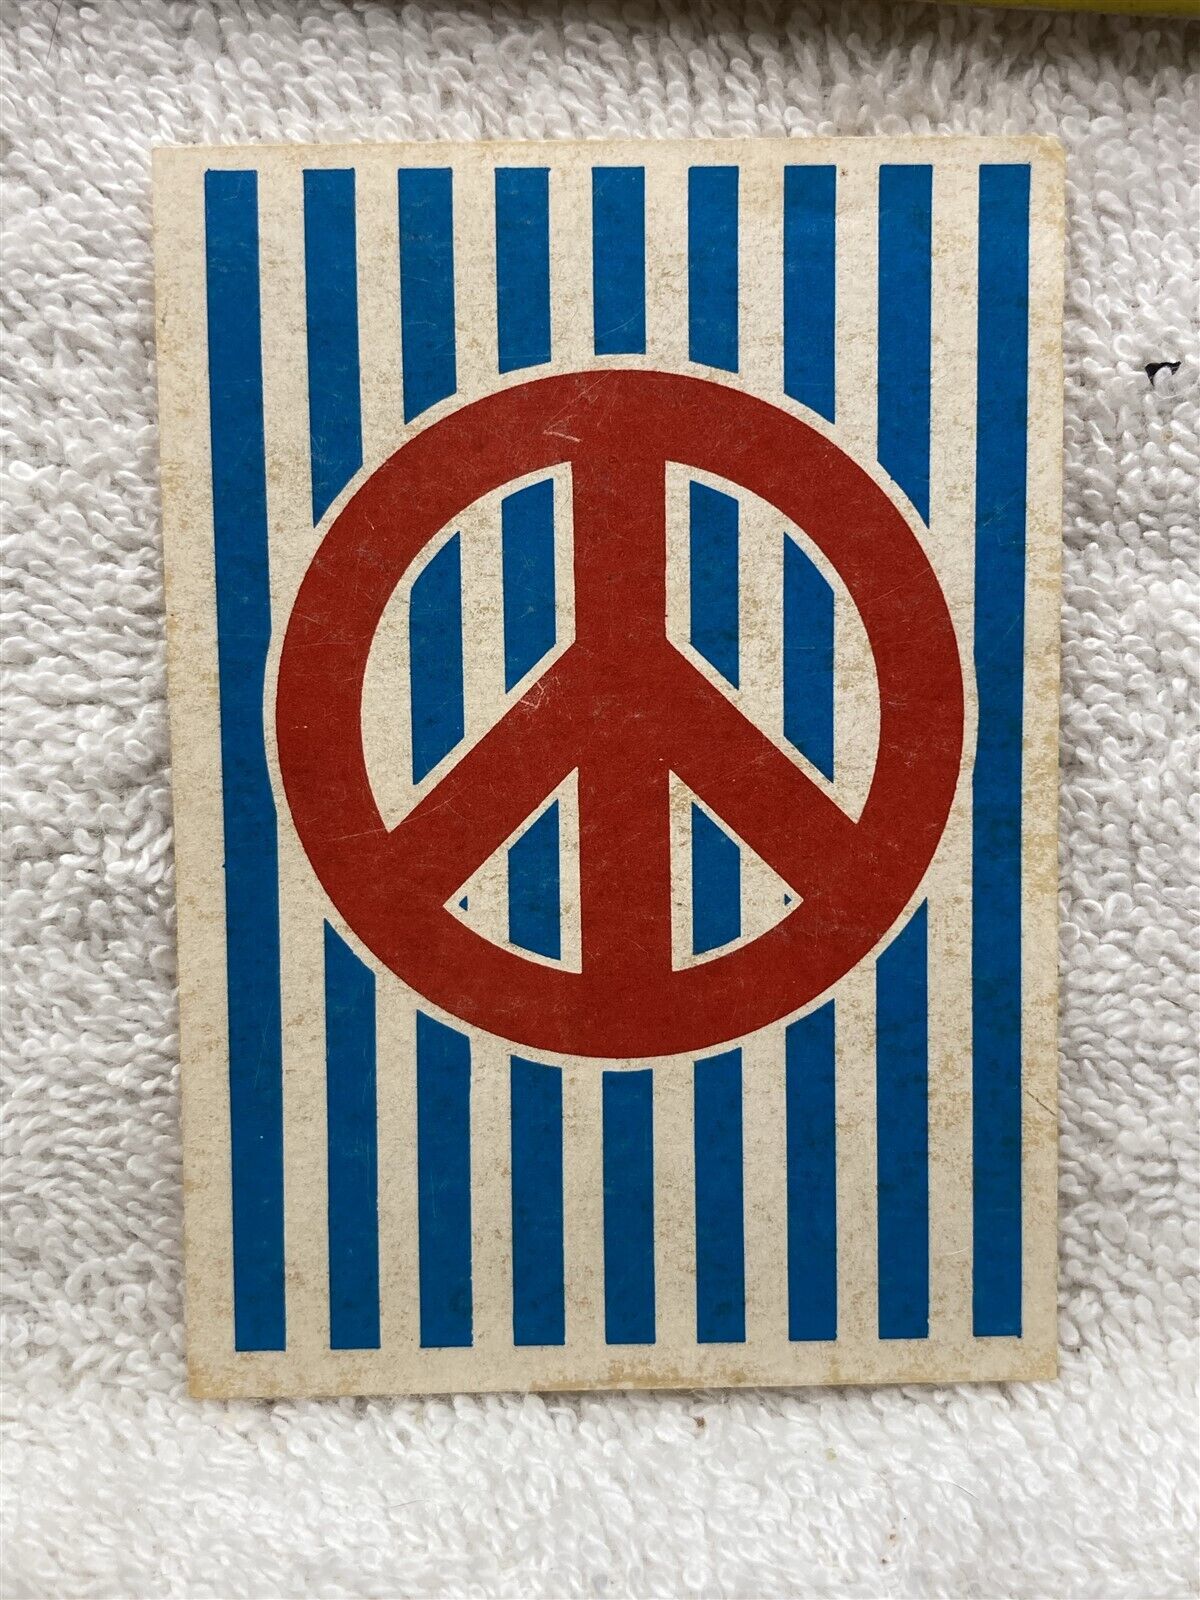 1960s Authentic Peace Sign Decal Unknown Brand Vtg